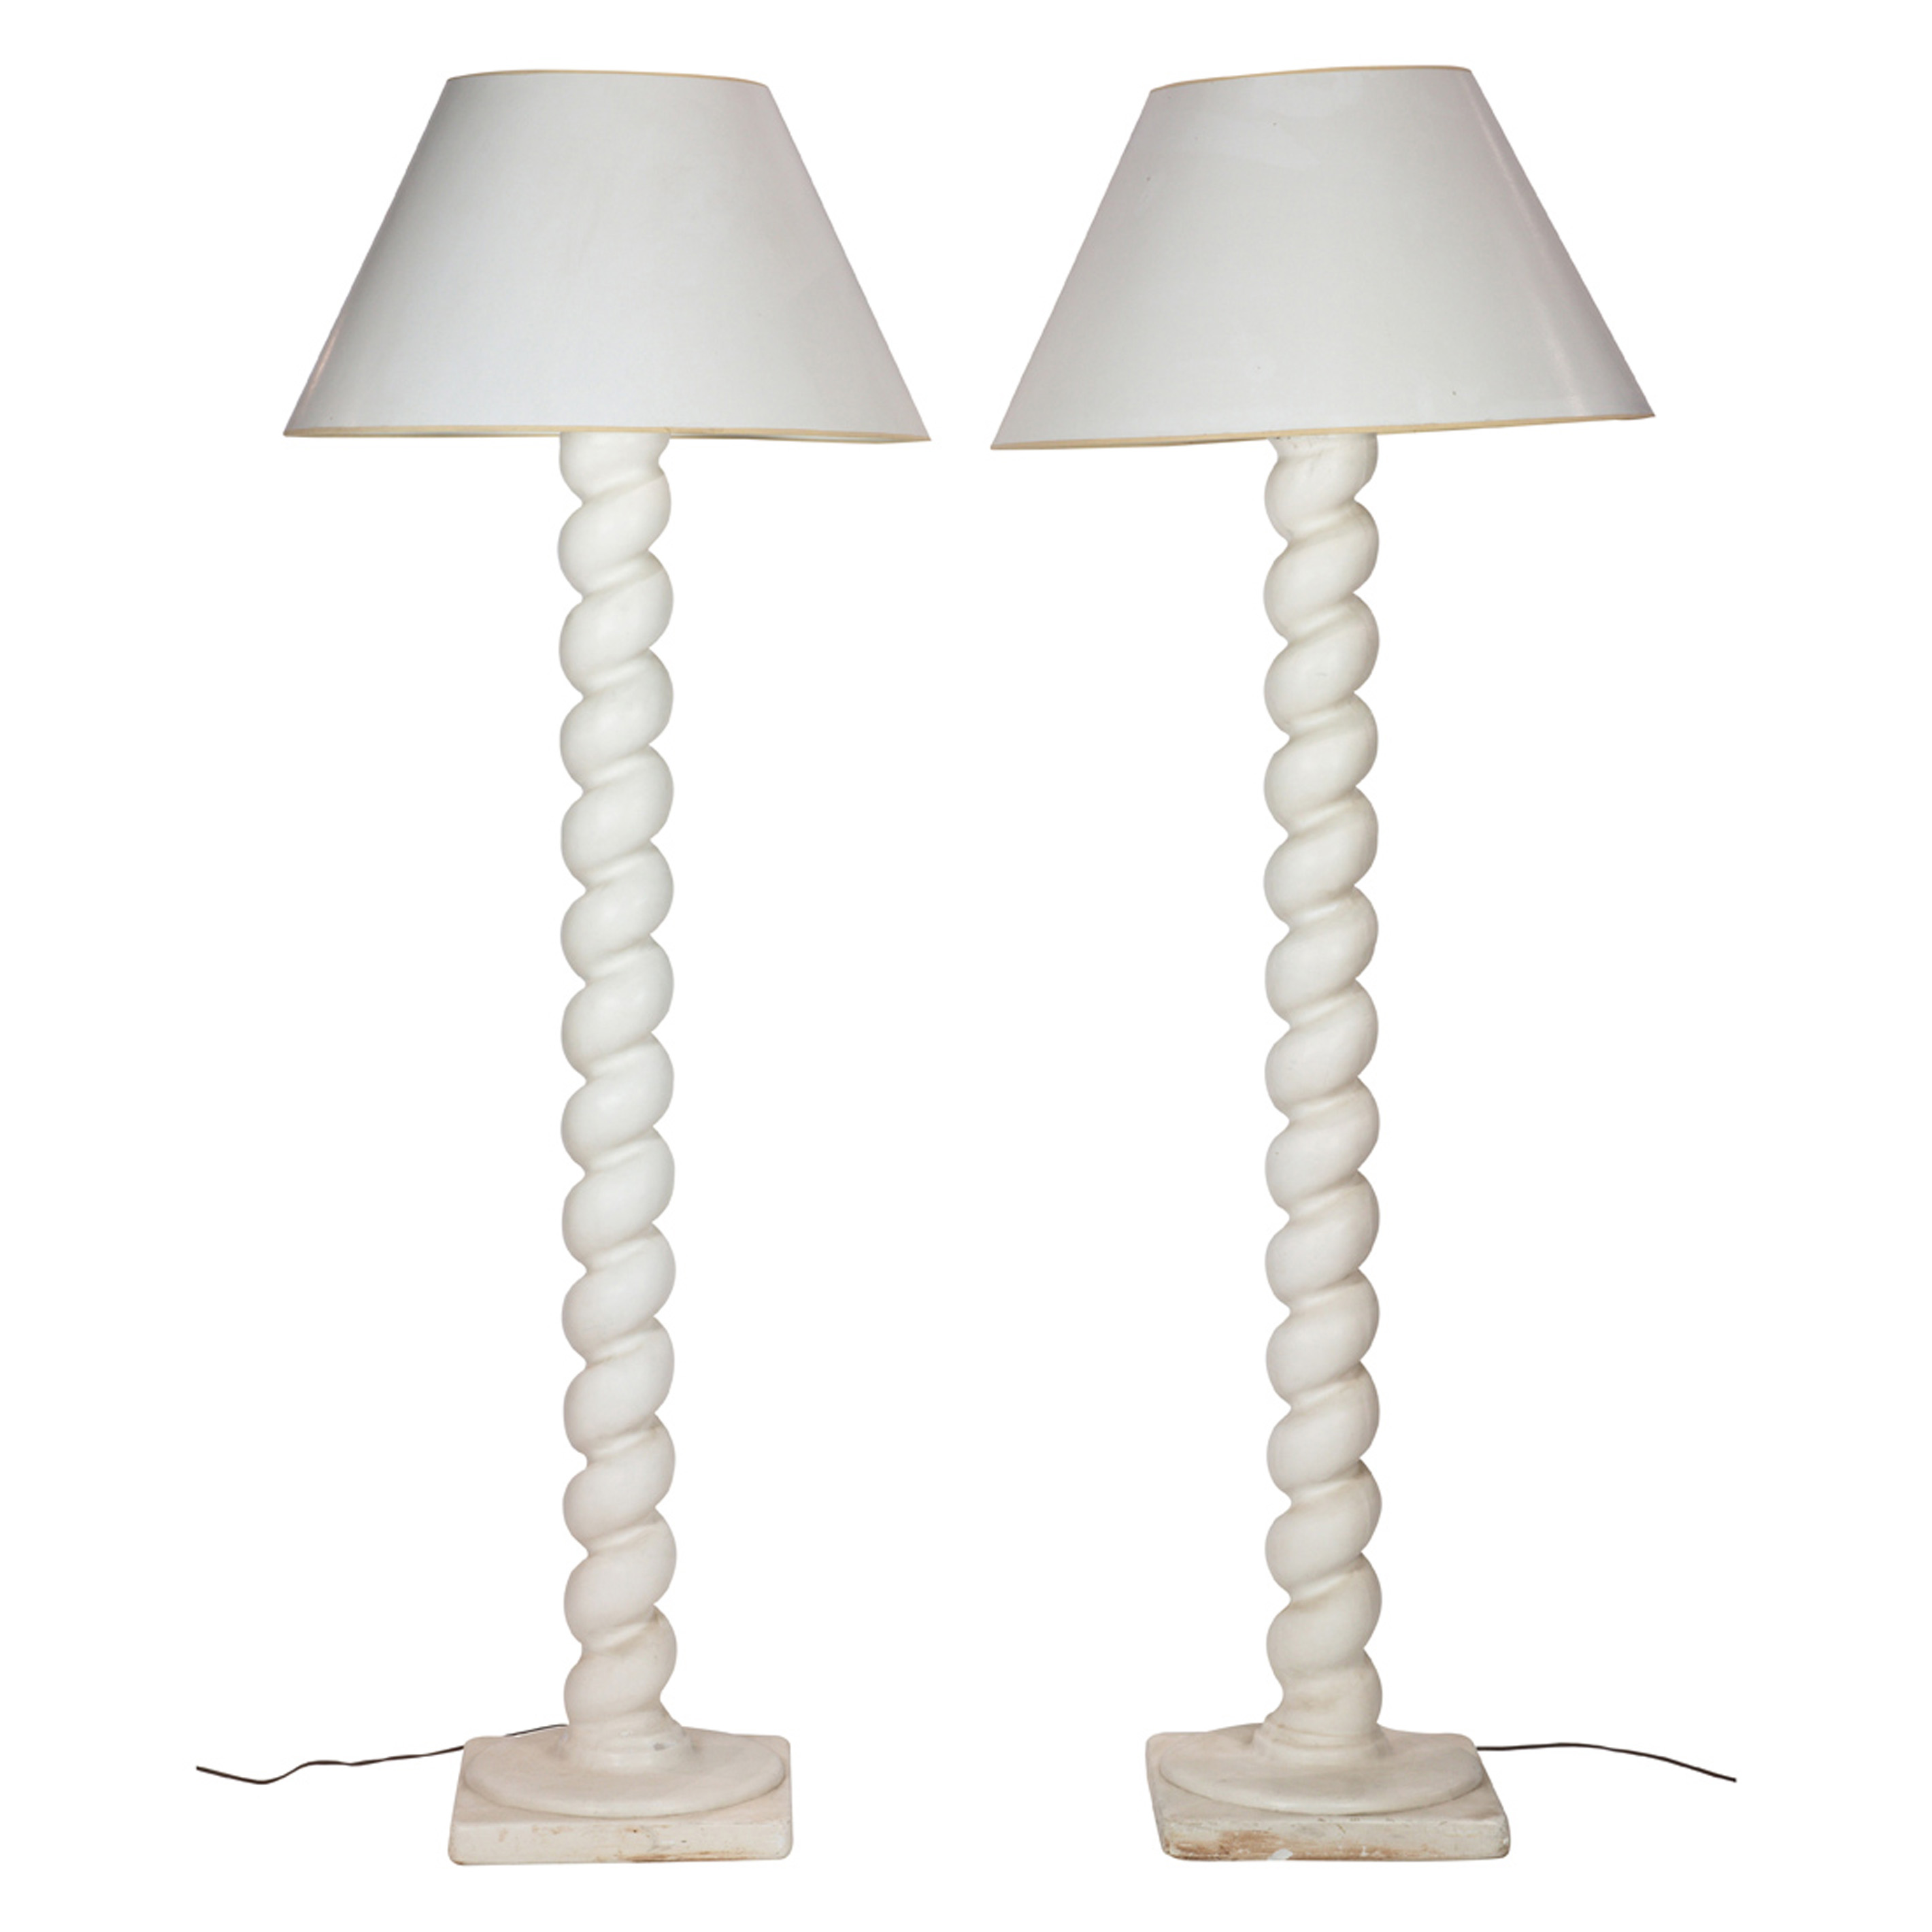 MICHAEL TAYLOR SPIRAL FLOOR LAMPS  3a4117